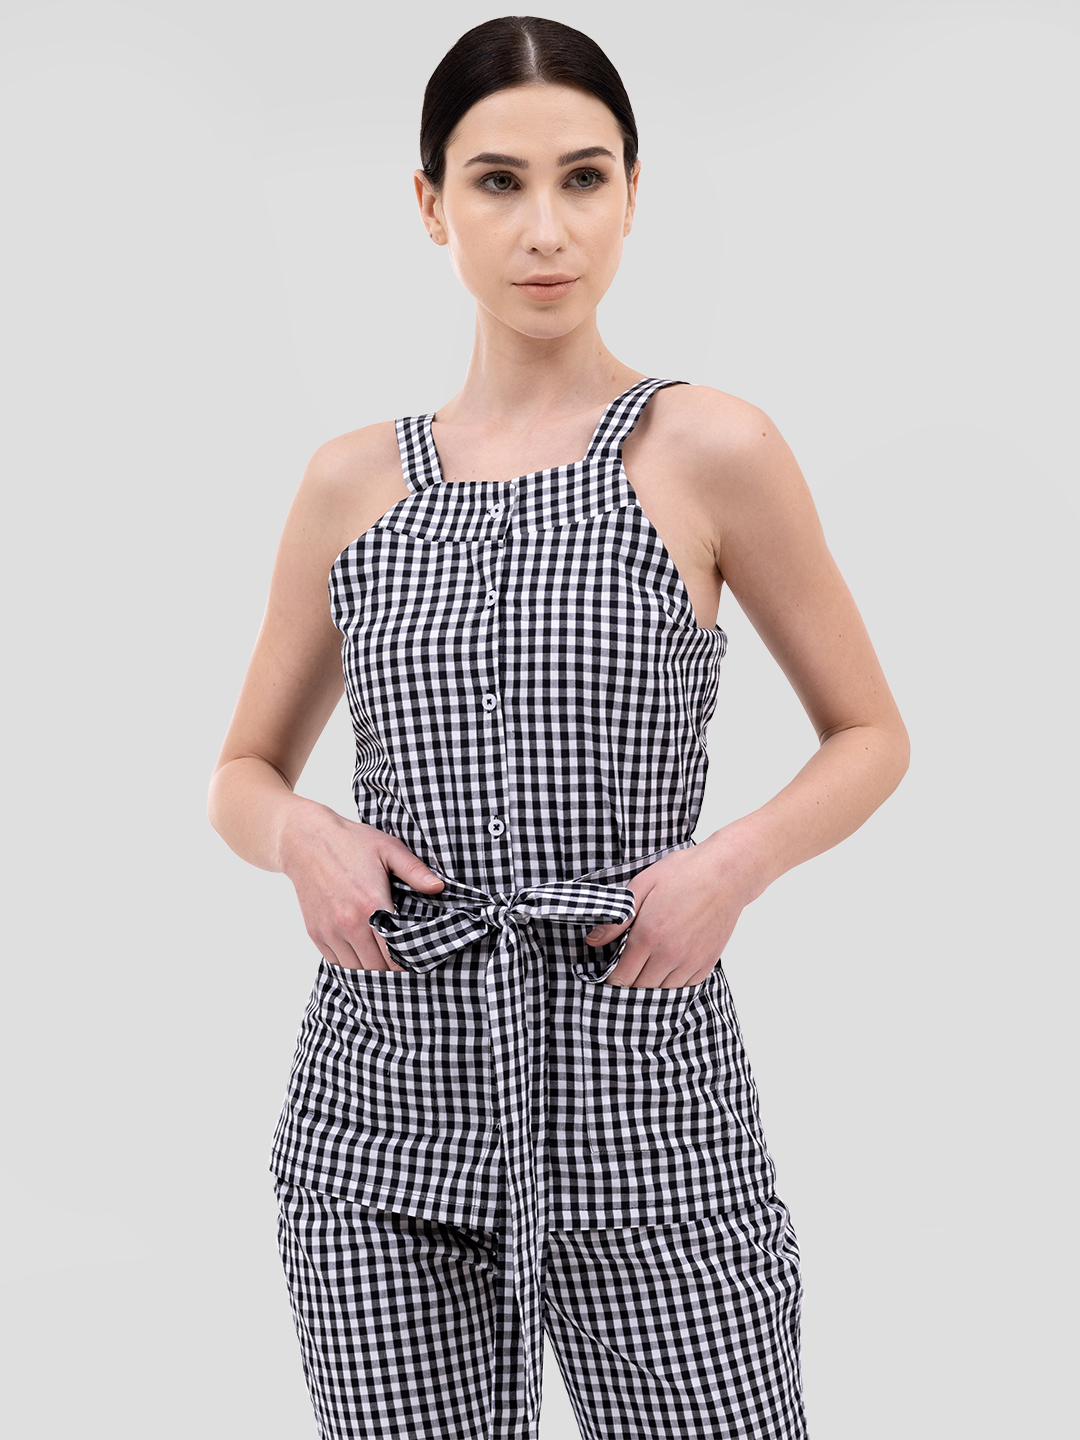 Strappy Black and White Gingham Tie Shirt -2